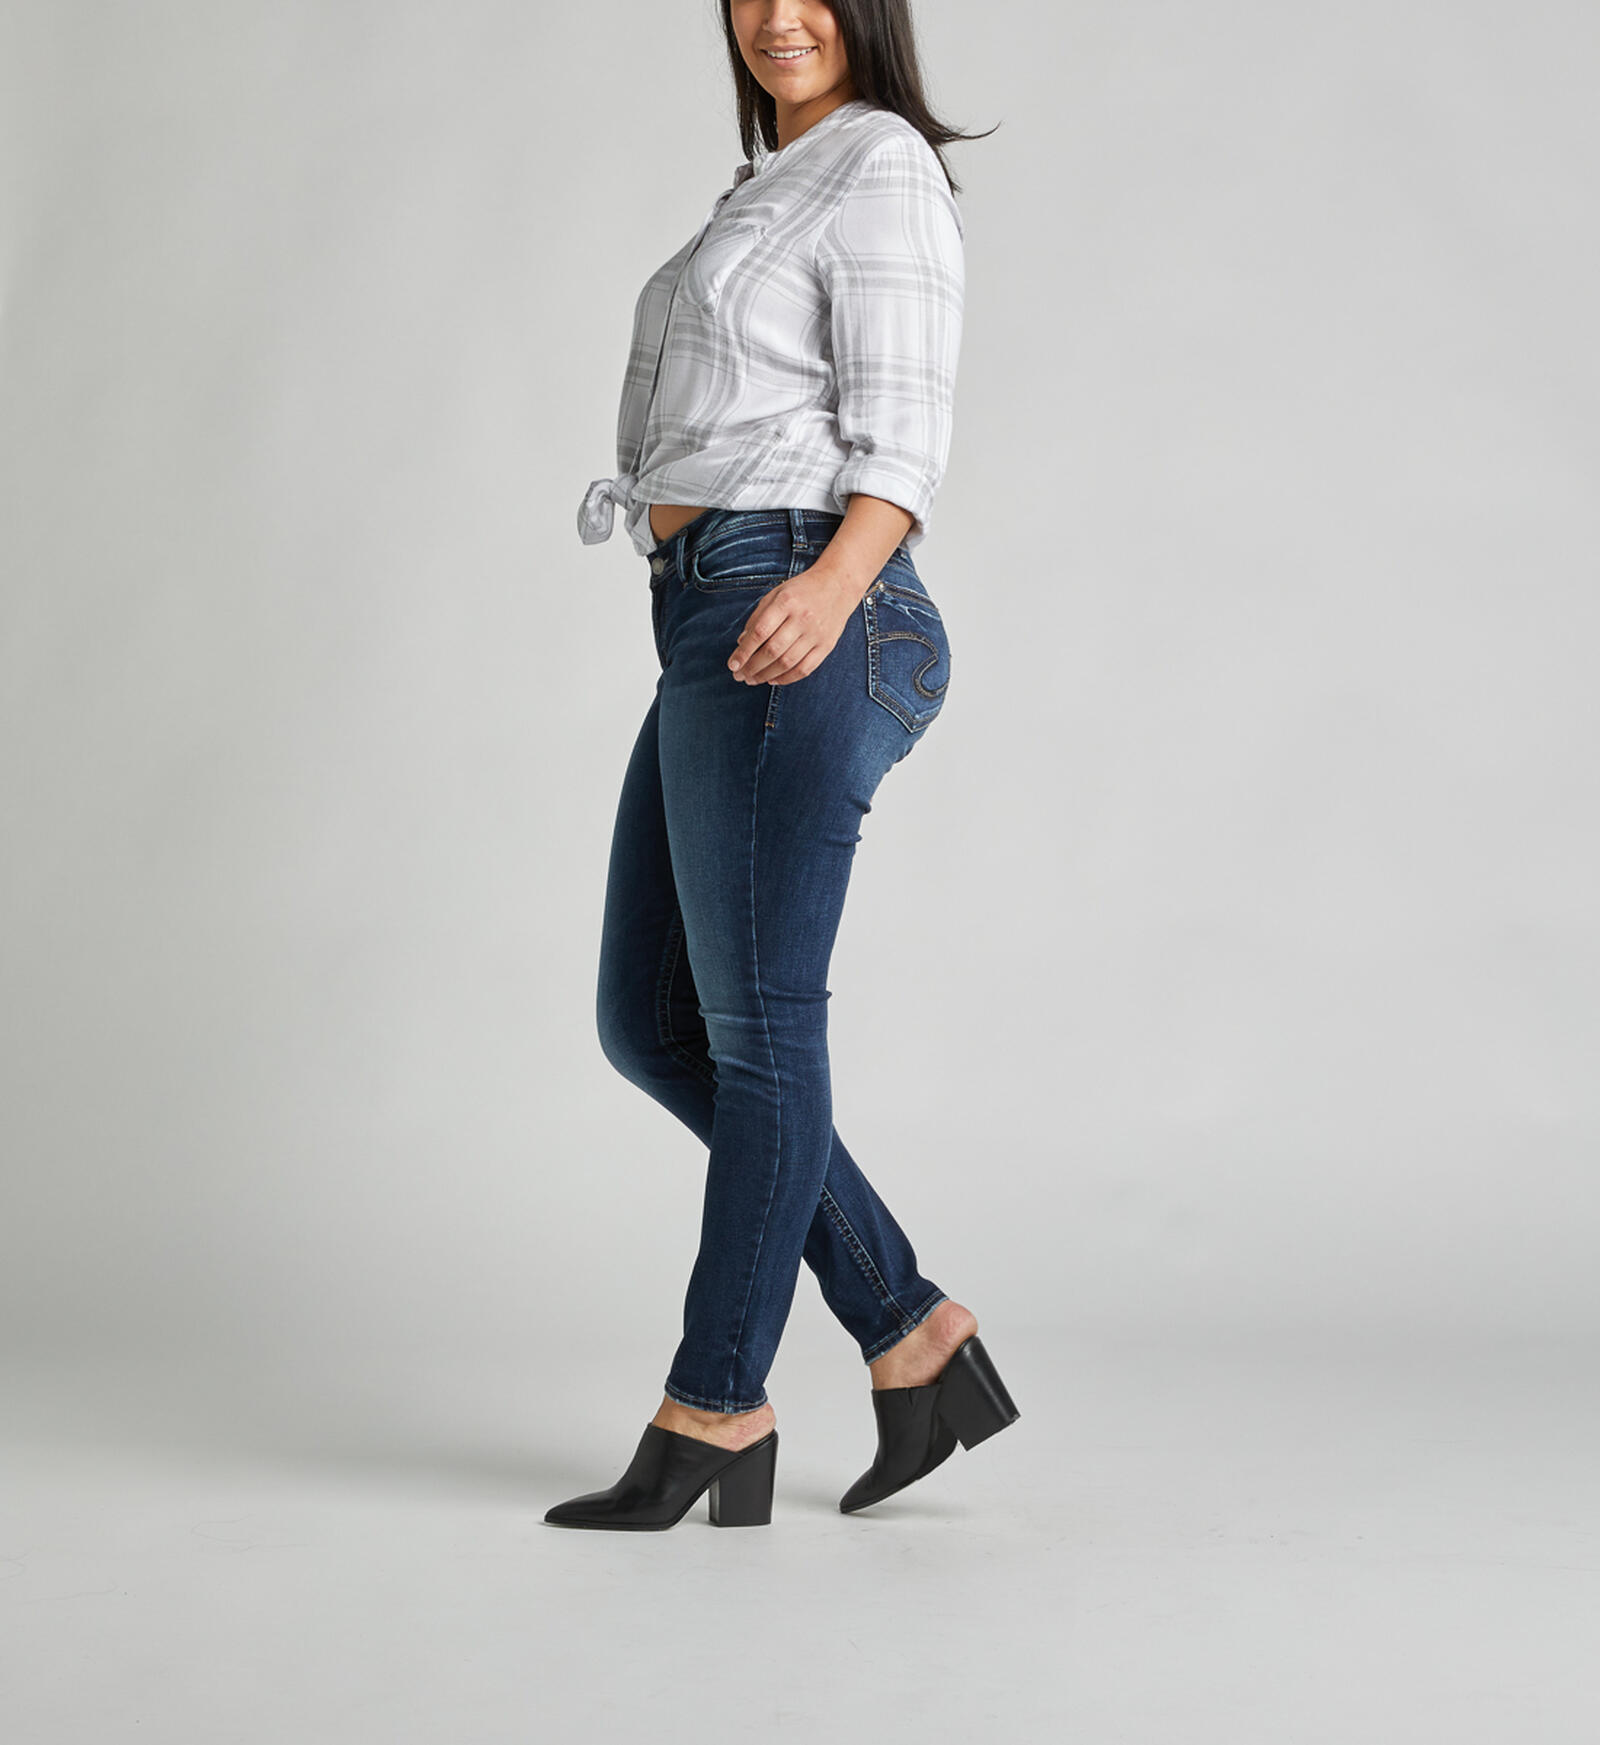 Buy Suki Mid Rise Super Skinny Jeans Plus Size for USD 89.00